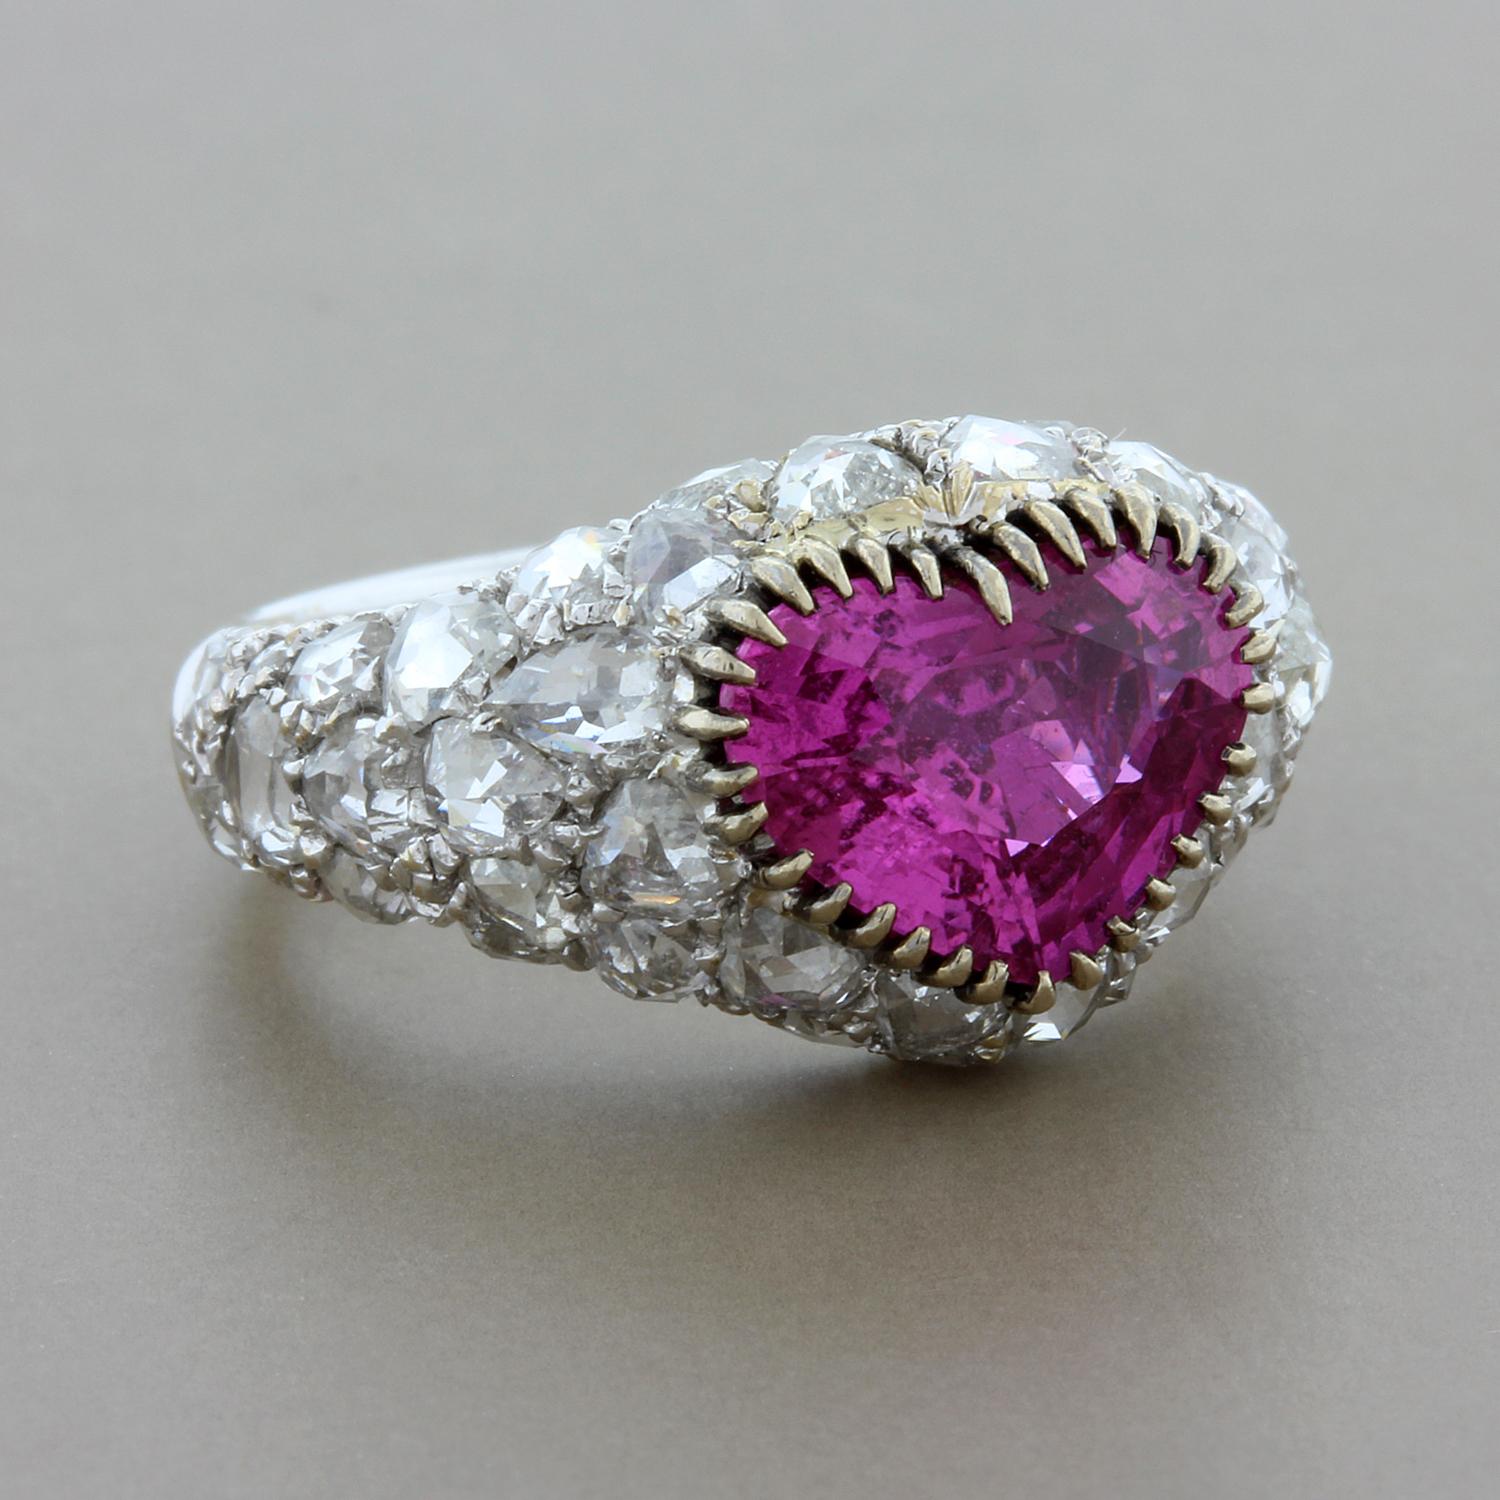 A lovely one of a kind ring featuring a beautifully colored GIA certified pink sapphire, about 2.82 carats heart shaped. Accenting the center gemstone and covering the ring are 2.42 carats of rose cut diamonds set in 18K white gold. 

GIA